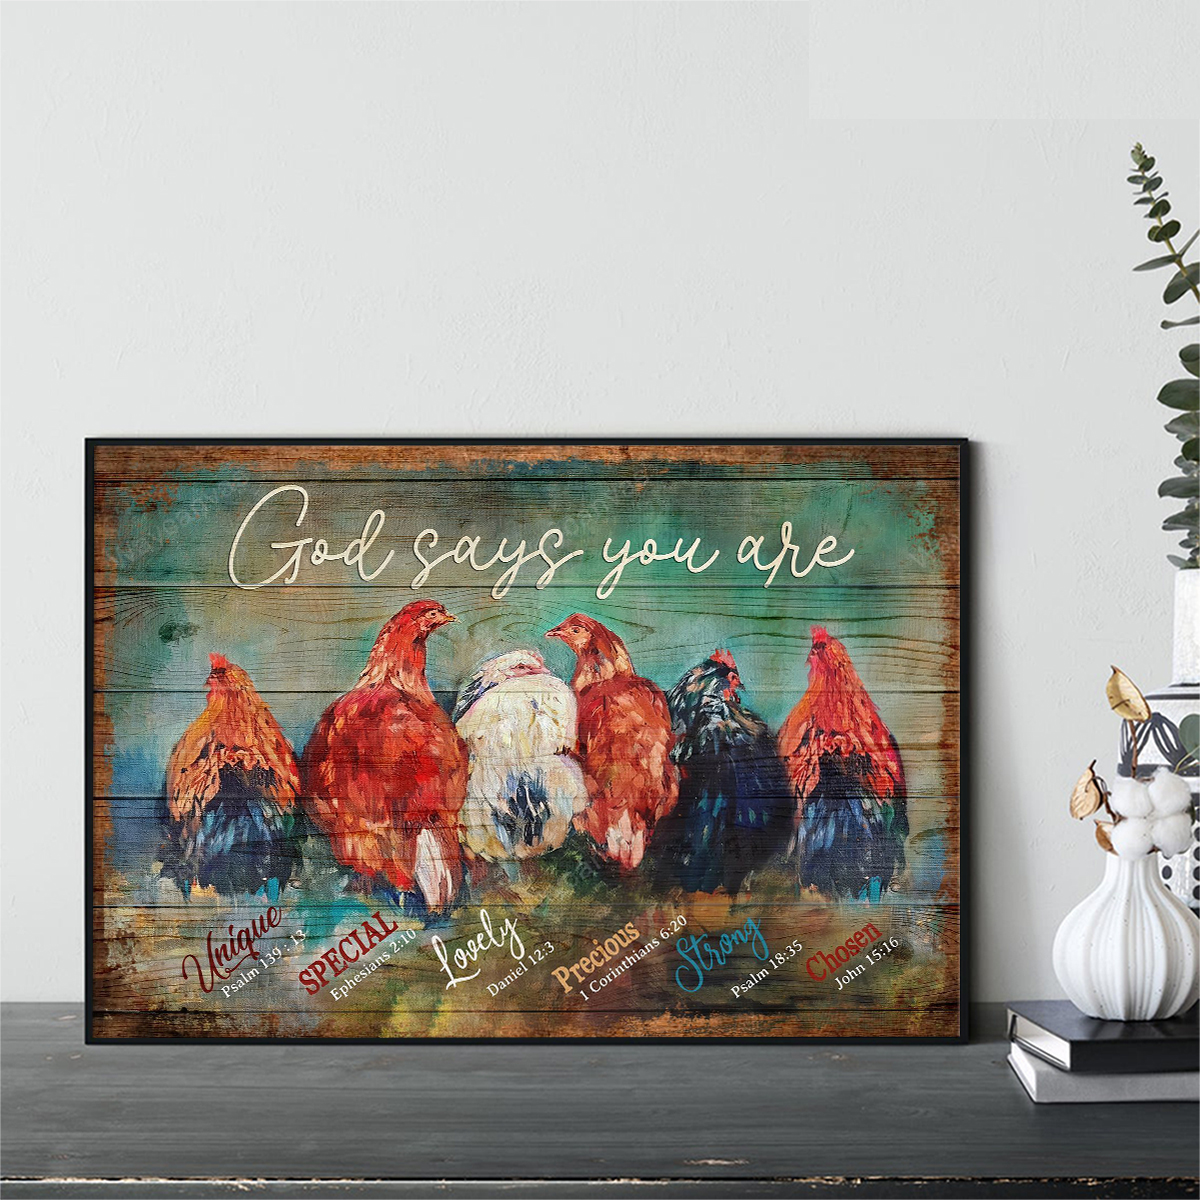 Chickens god says you are jesus canvas small